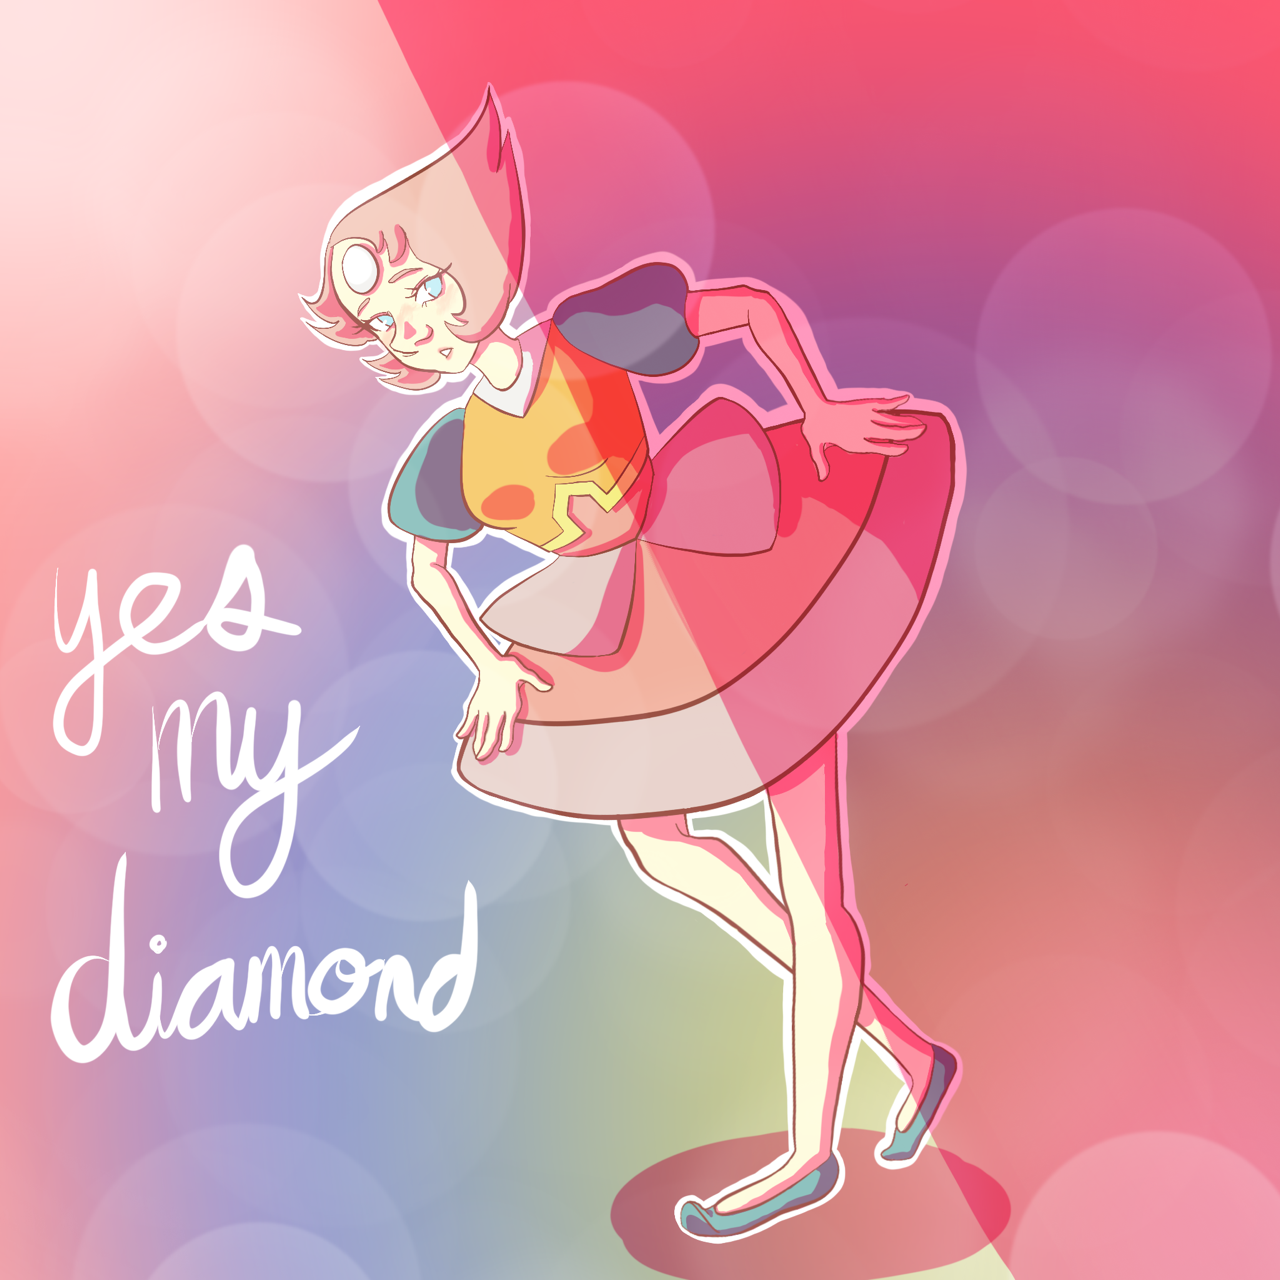 I’m beginning to love this pearl